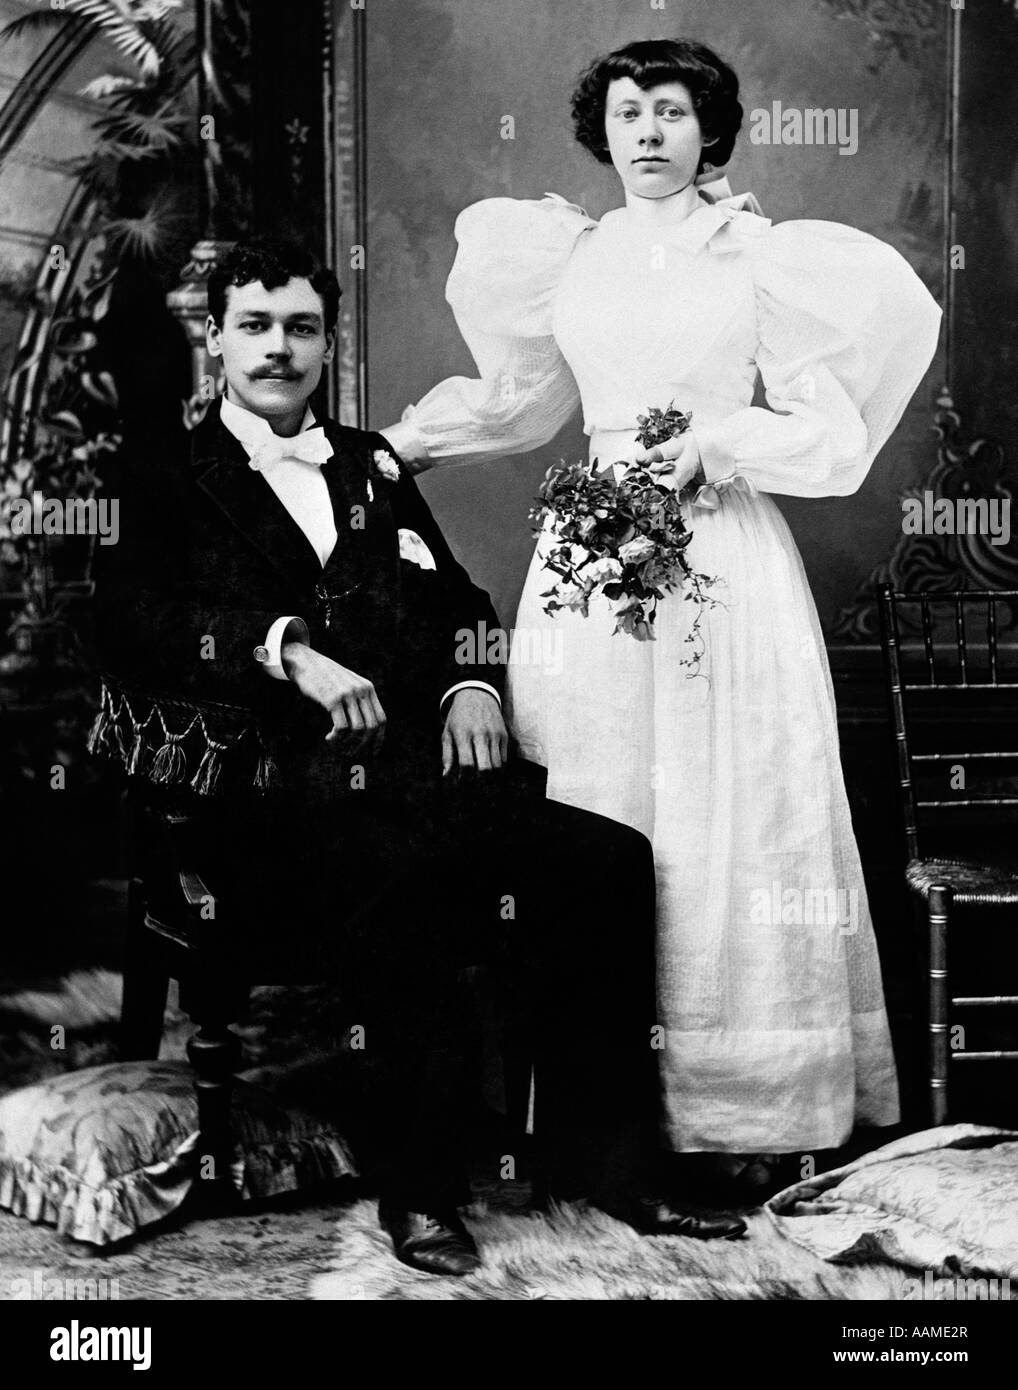 EARLY 1900s FORMAL PORTRAIT OF BRIDE AND GROOM MAN SEATED WOMAN STANDING INDOOR Stock Photo